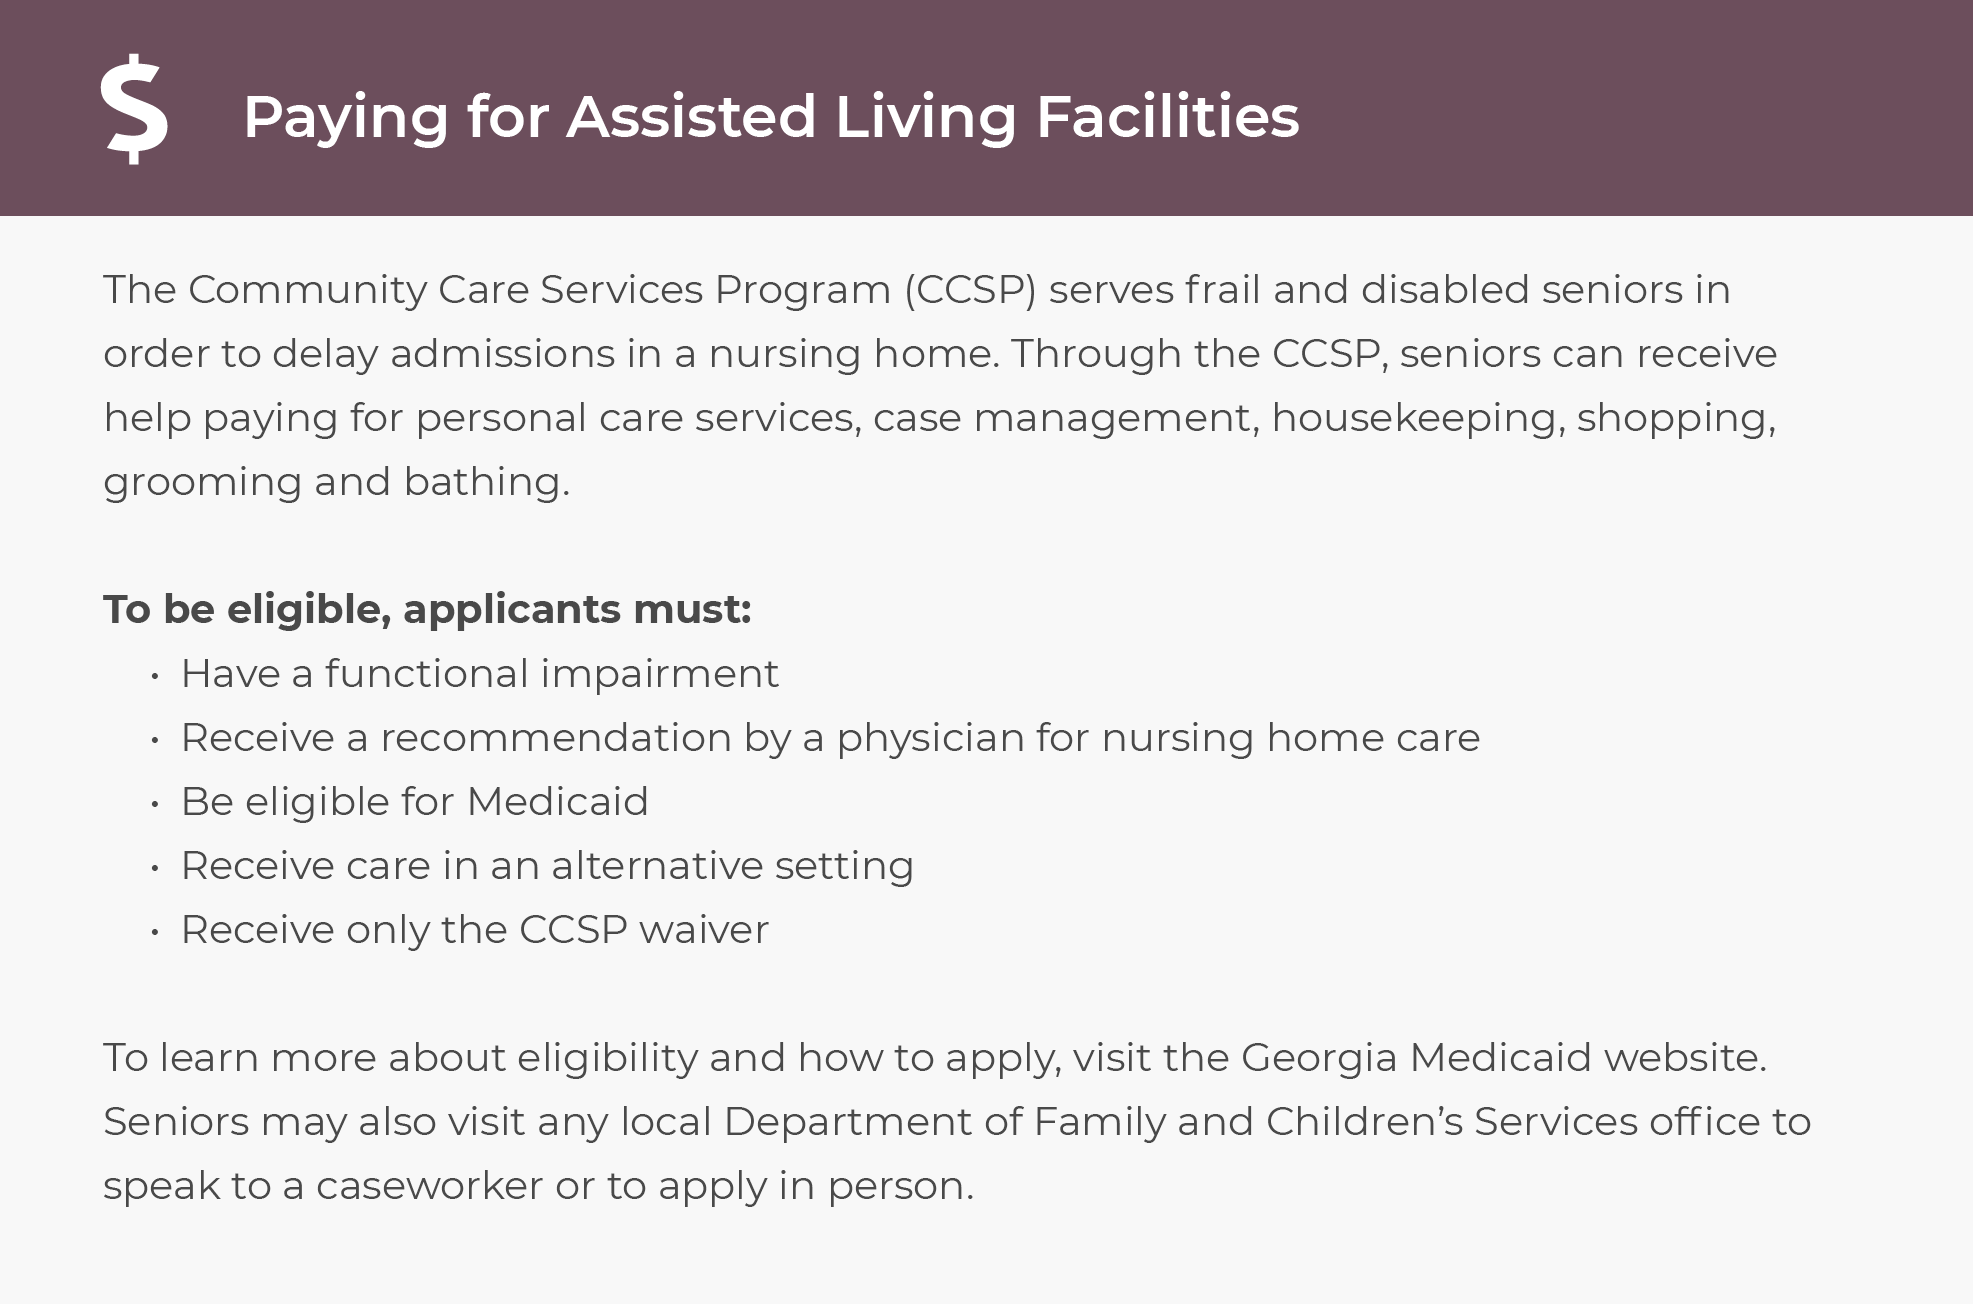 More ways to pay for assisted living in Georgia